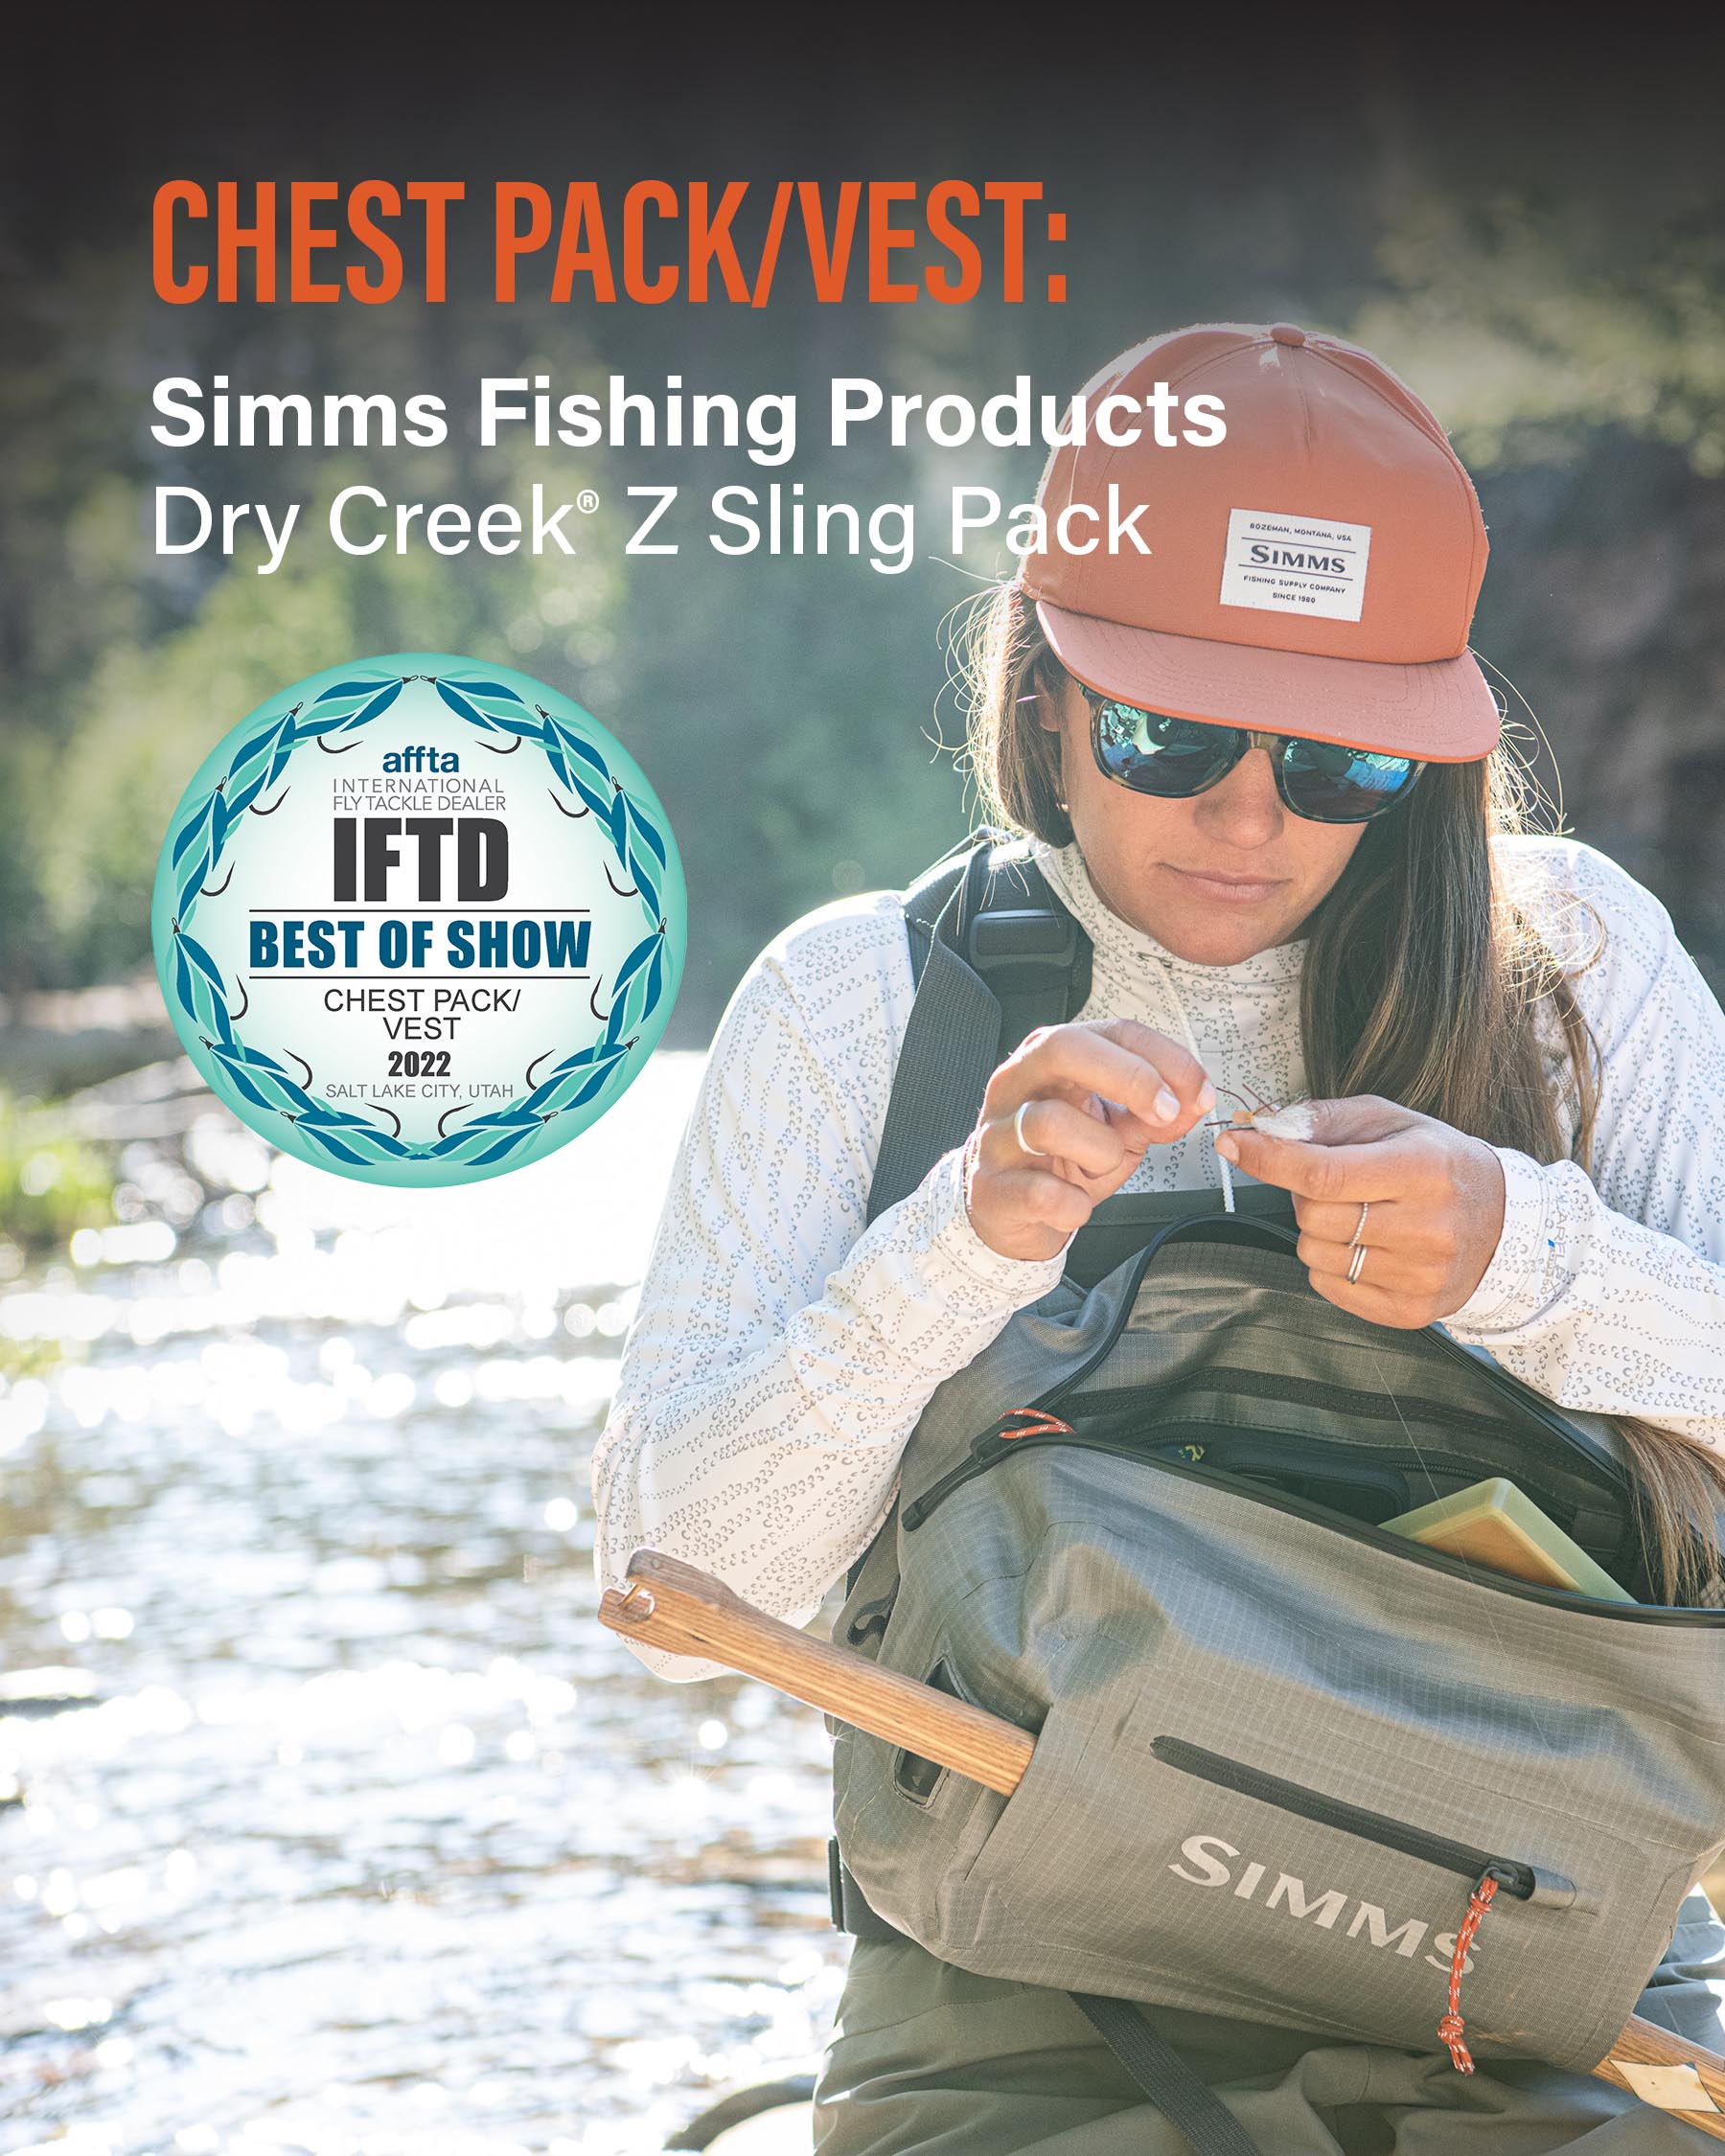 Fly fishing bags - Ecotone L'Ami Sport